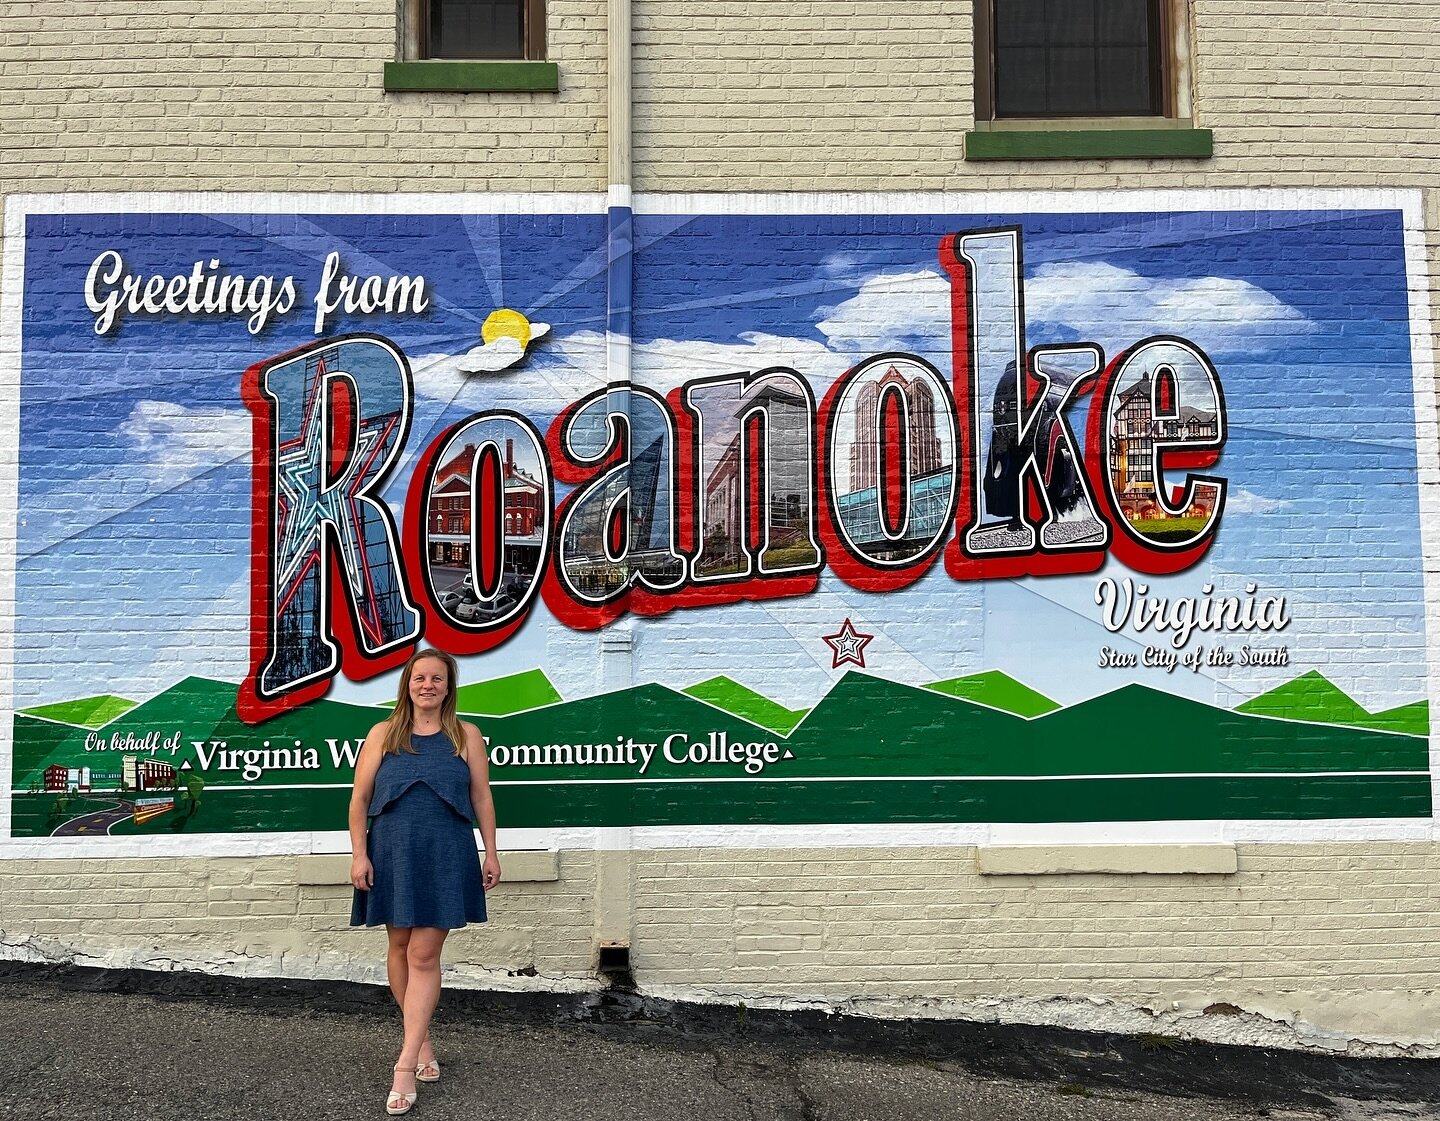 hello Roanoke! 👋 If you love our Blue Ridge mountain city as much as us, you&rsquo;re in the right spot! Thank you for following along as we share all the cool stuff going on around Roanoke 🌄

Have you discovered a new to you event, activity, or bu